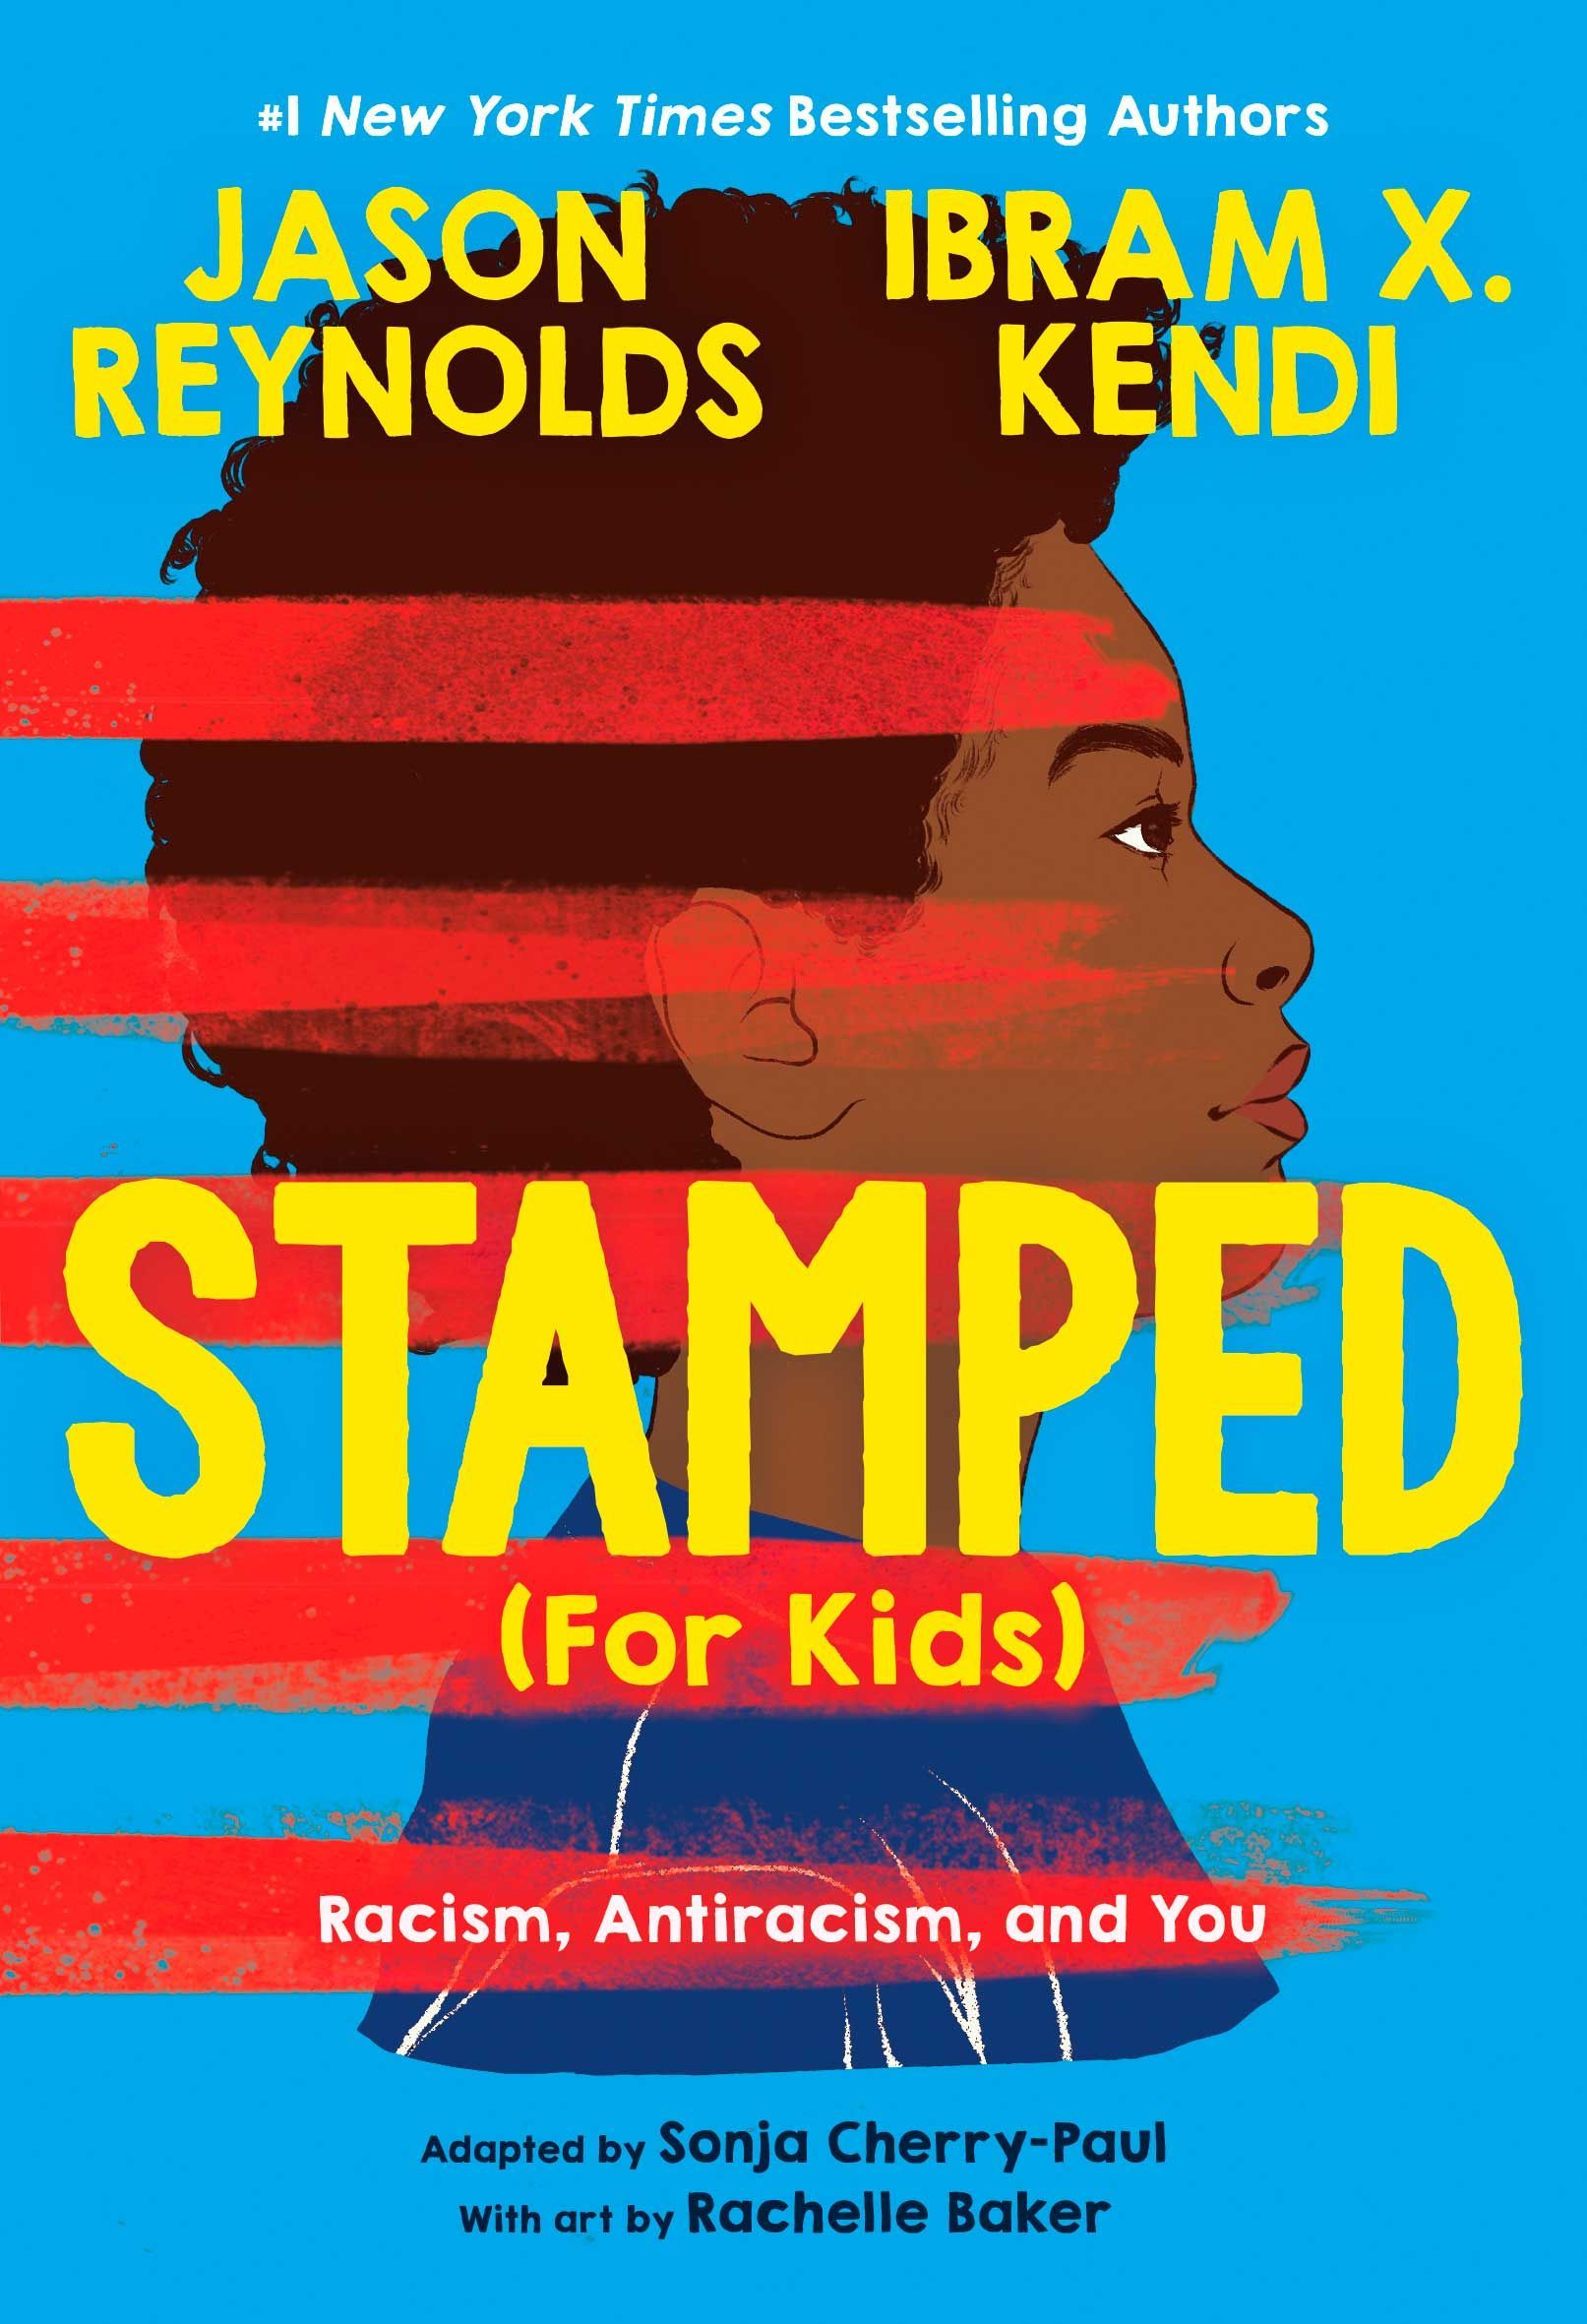 Stamped (for Kids): Racism, Antiracism, and You by Jason Reynolds and Ibram X. Kendi